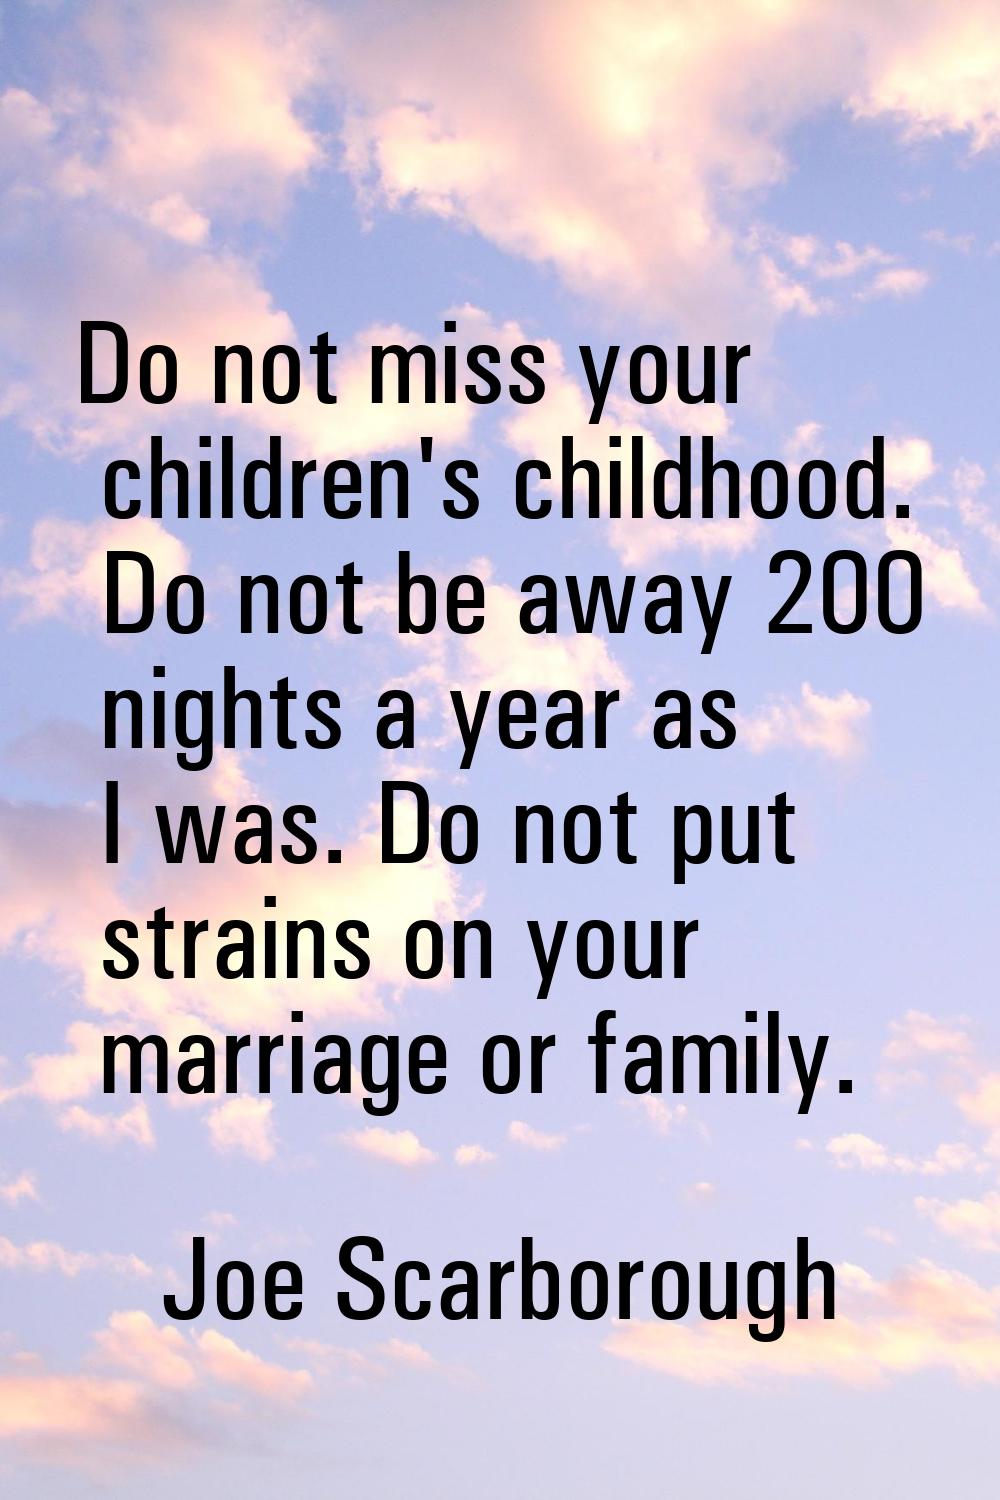 Do not miss your children's childhood. Do not be away 200 nights a year as I was. Do not put strain